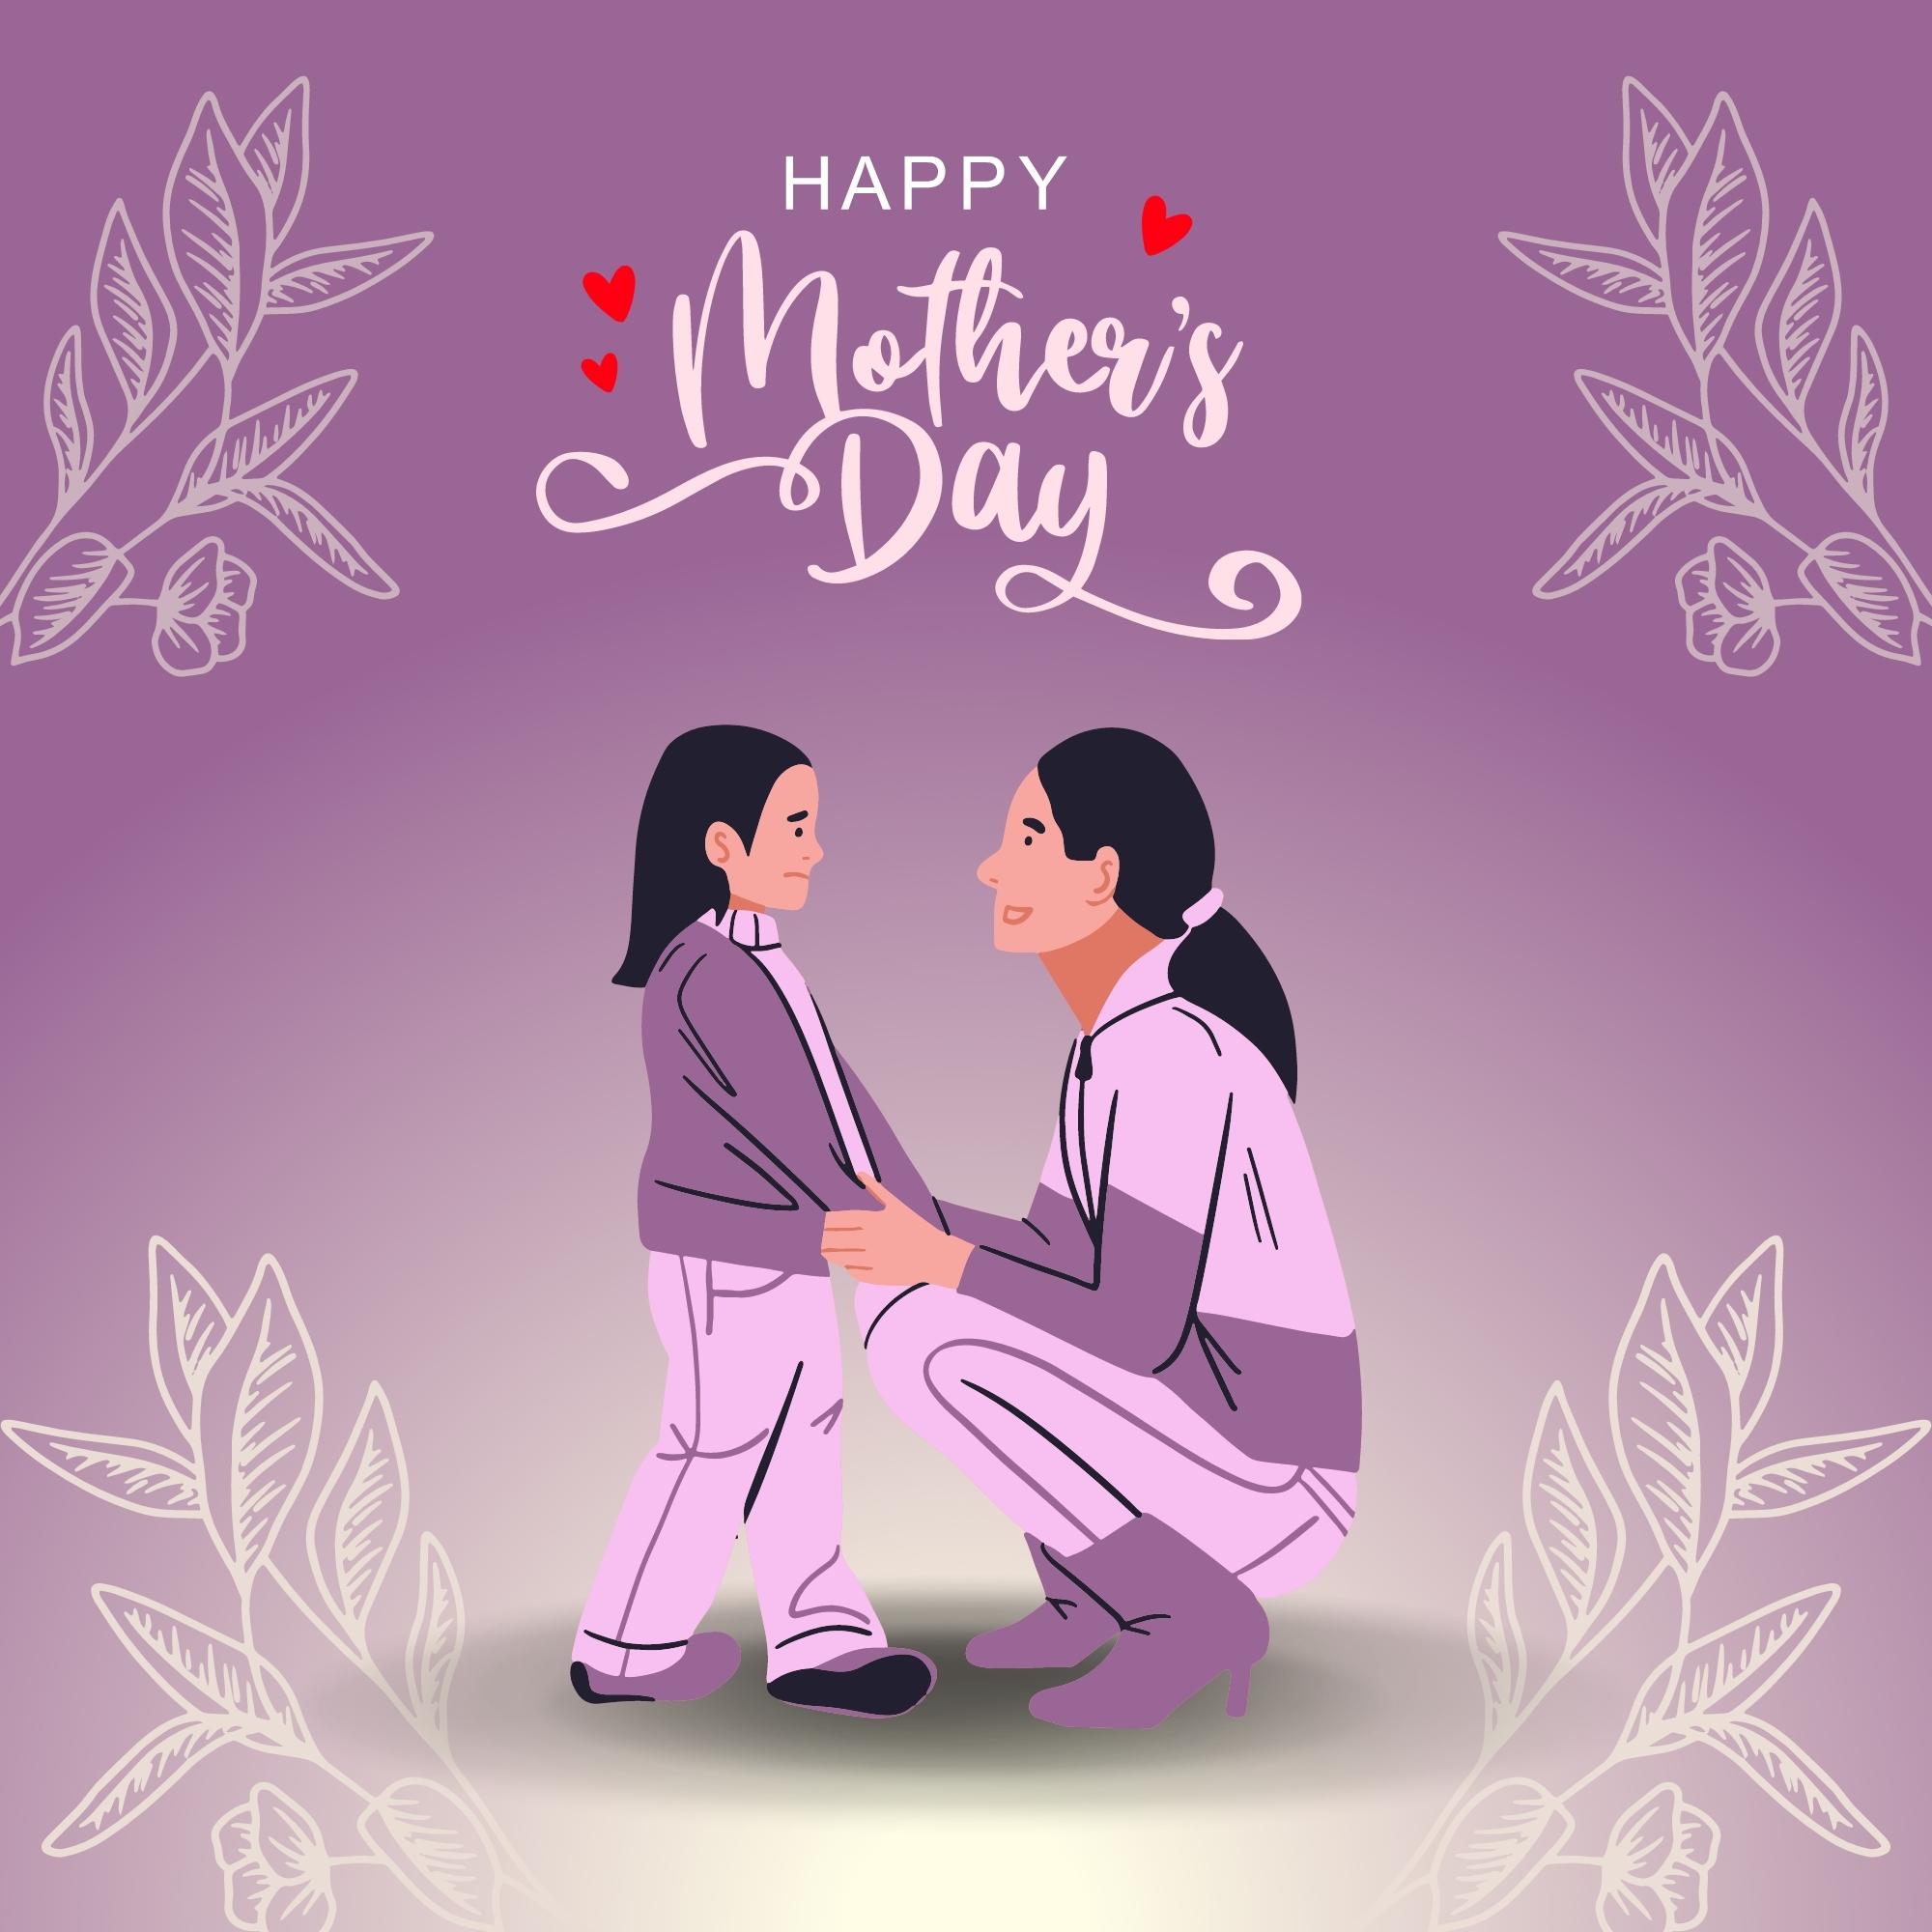 Happy Mothers Day Images | 1023 | Free Download [8k,4k,Hd]